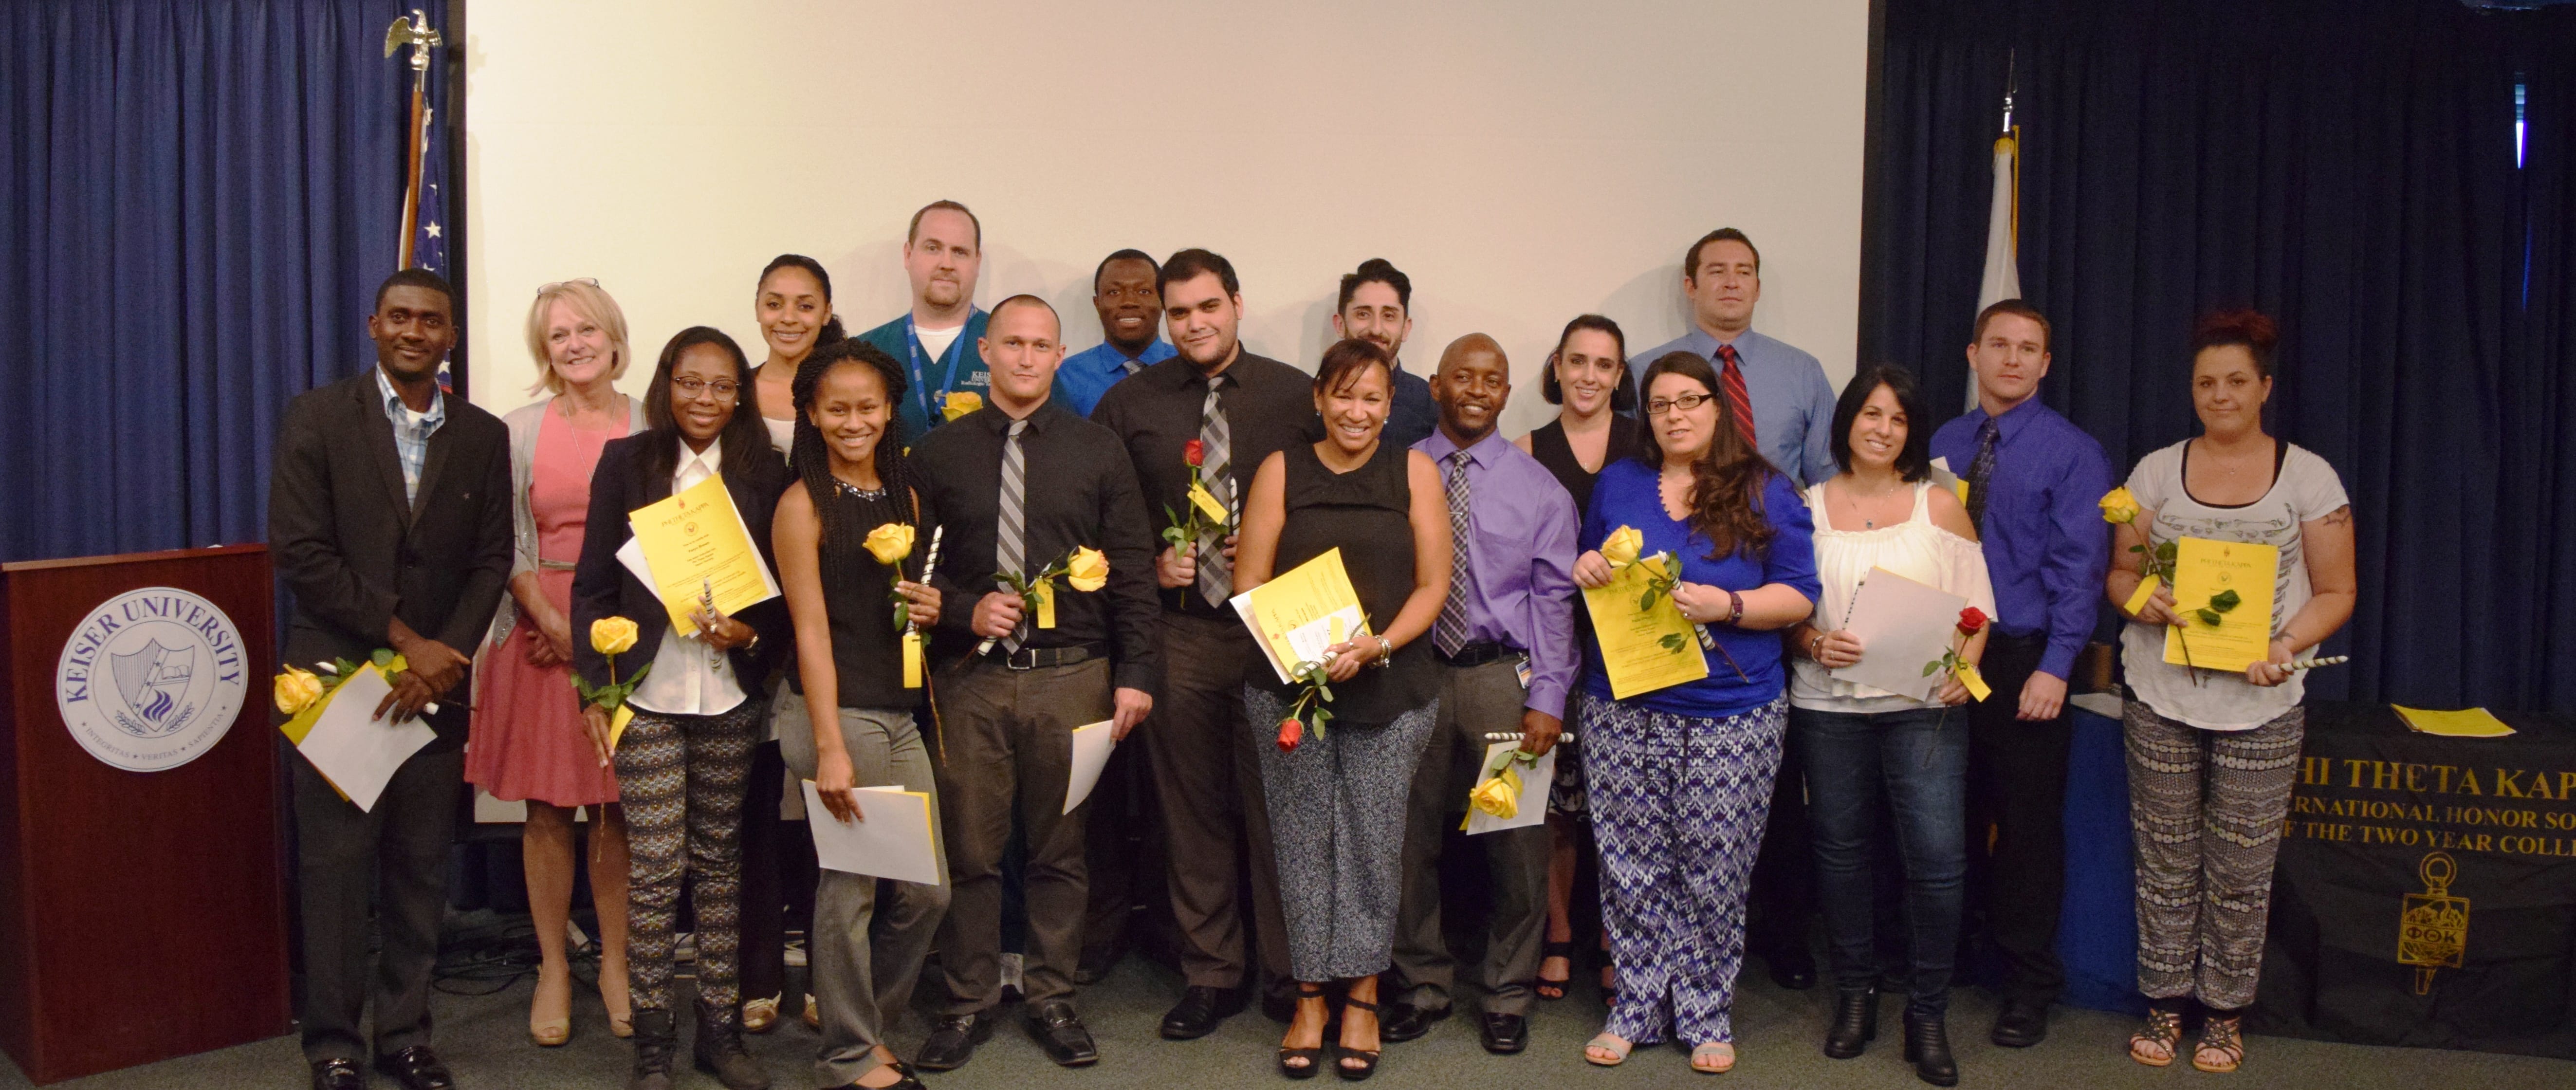 New PTK Members Inducted at Ft. Lauderdale Campus